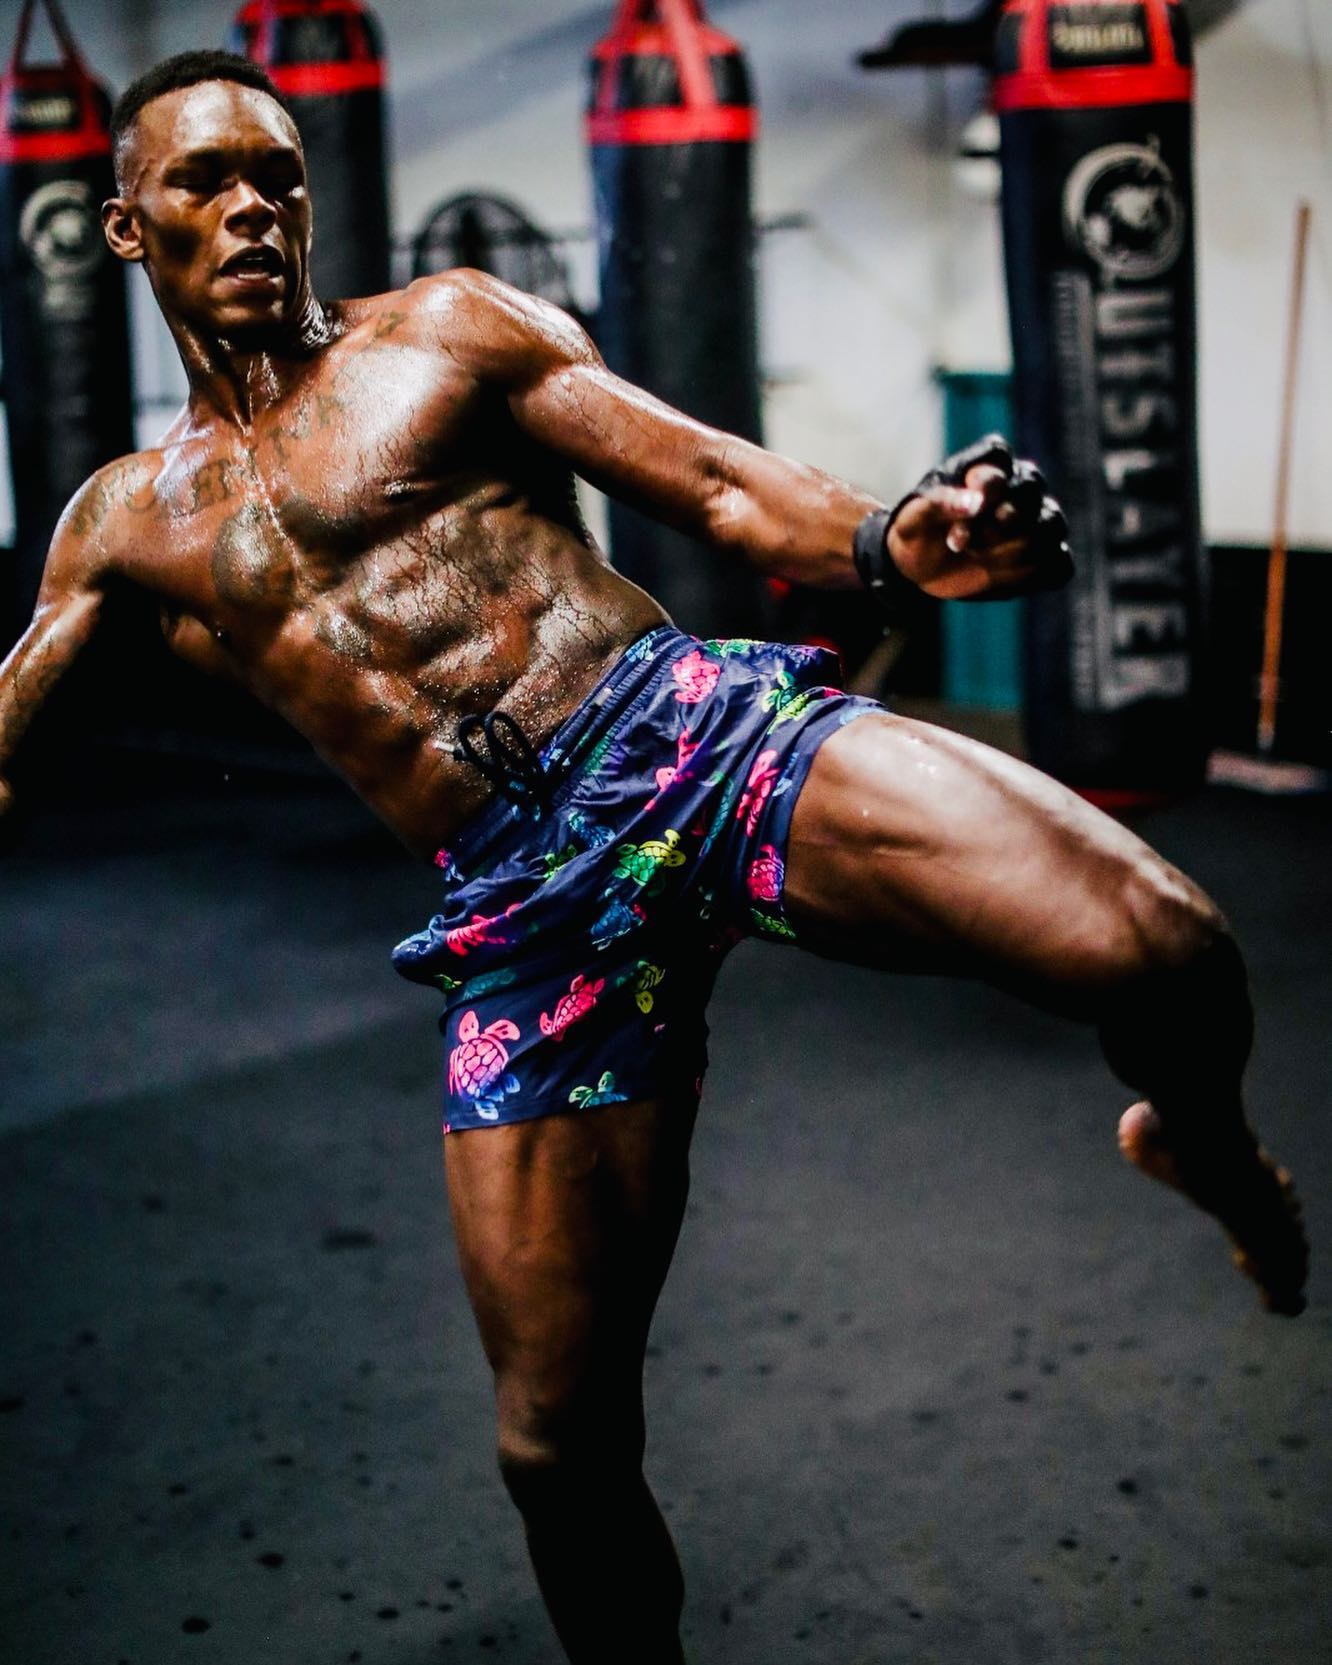 Jared Cannonier opens up about his first meeting with Israel Adesanya